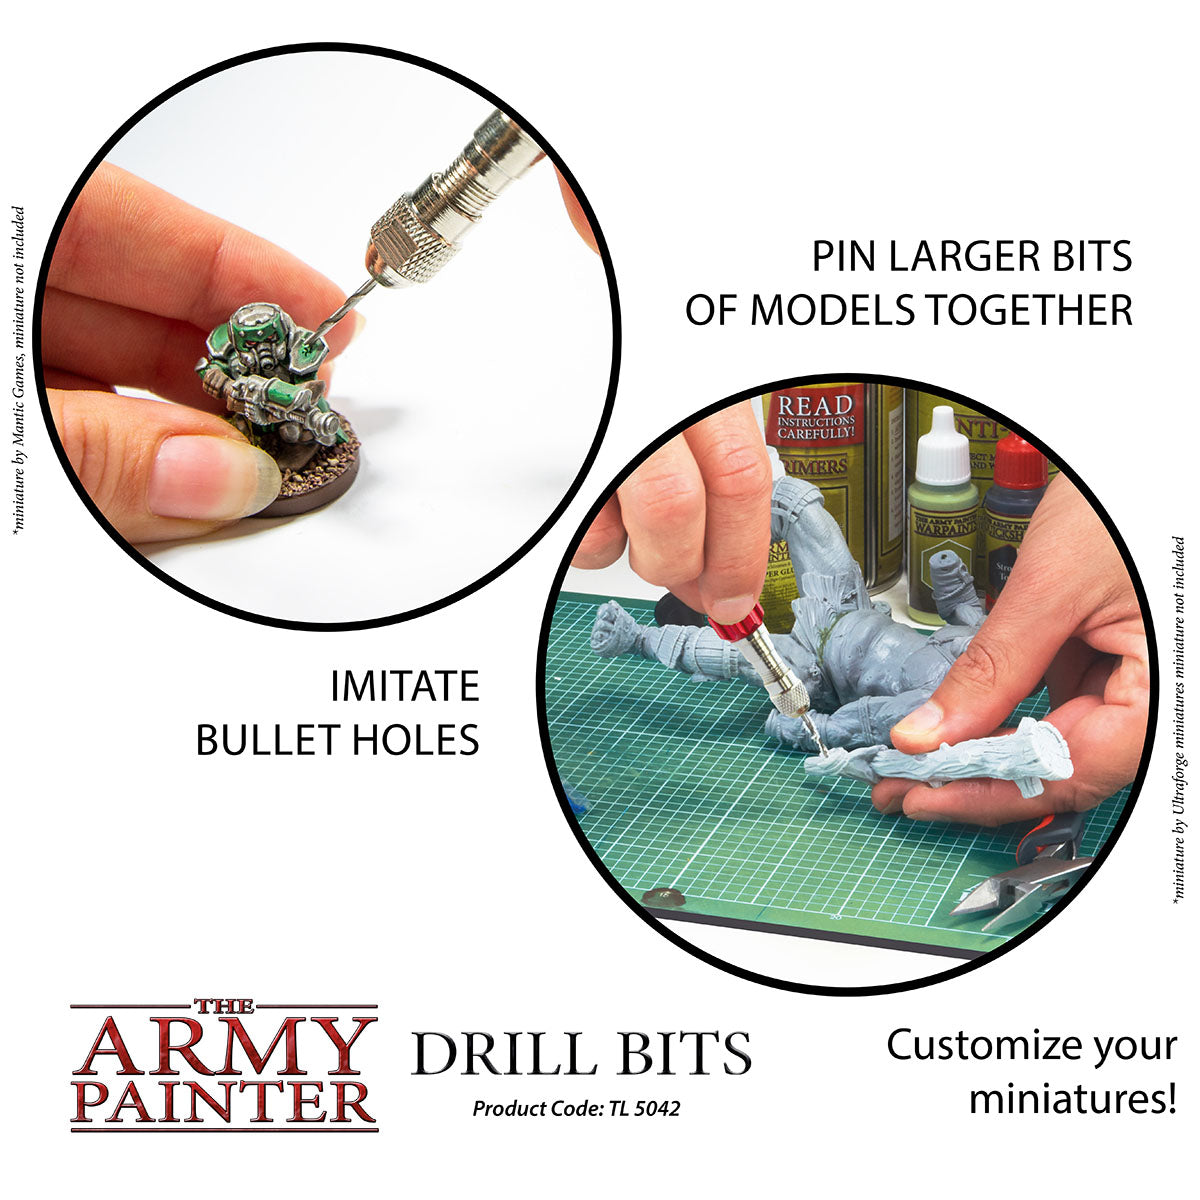 Army Painter Drill Bits | The Clever Kobold